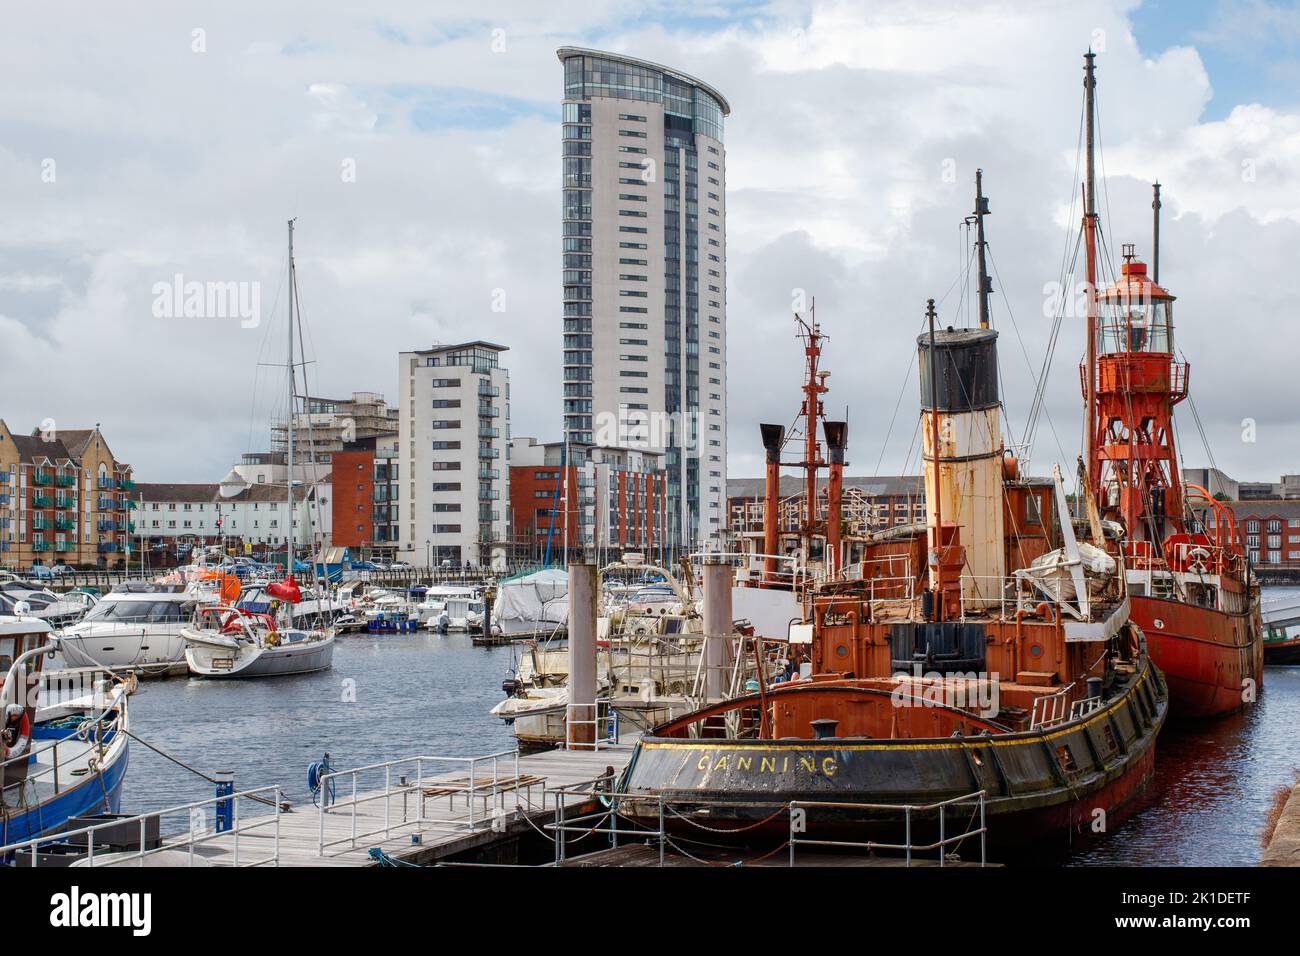 The Trinity House Lightship 91 Helwick moored along with Boats and yachts in Swansea Basin. Stock Photo